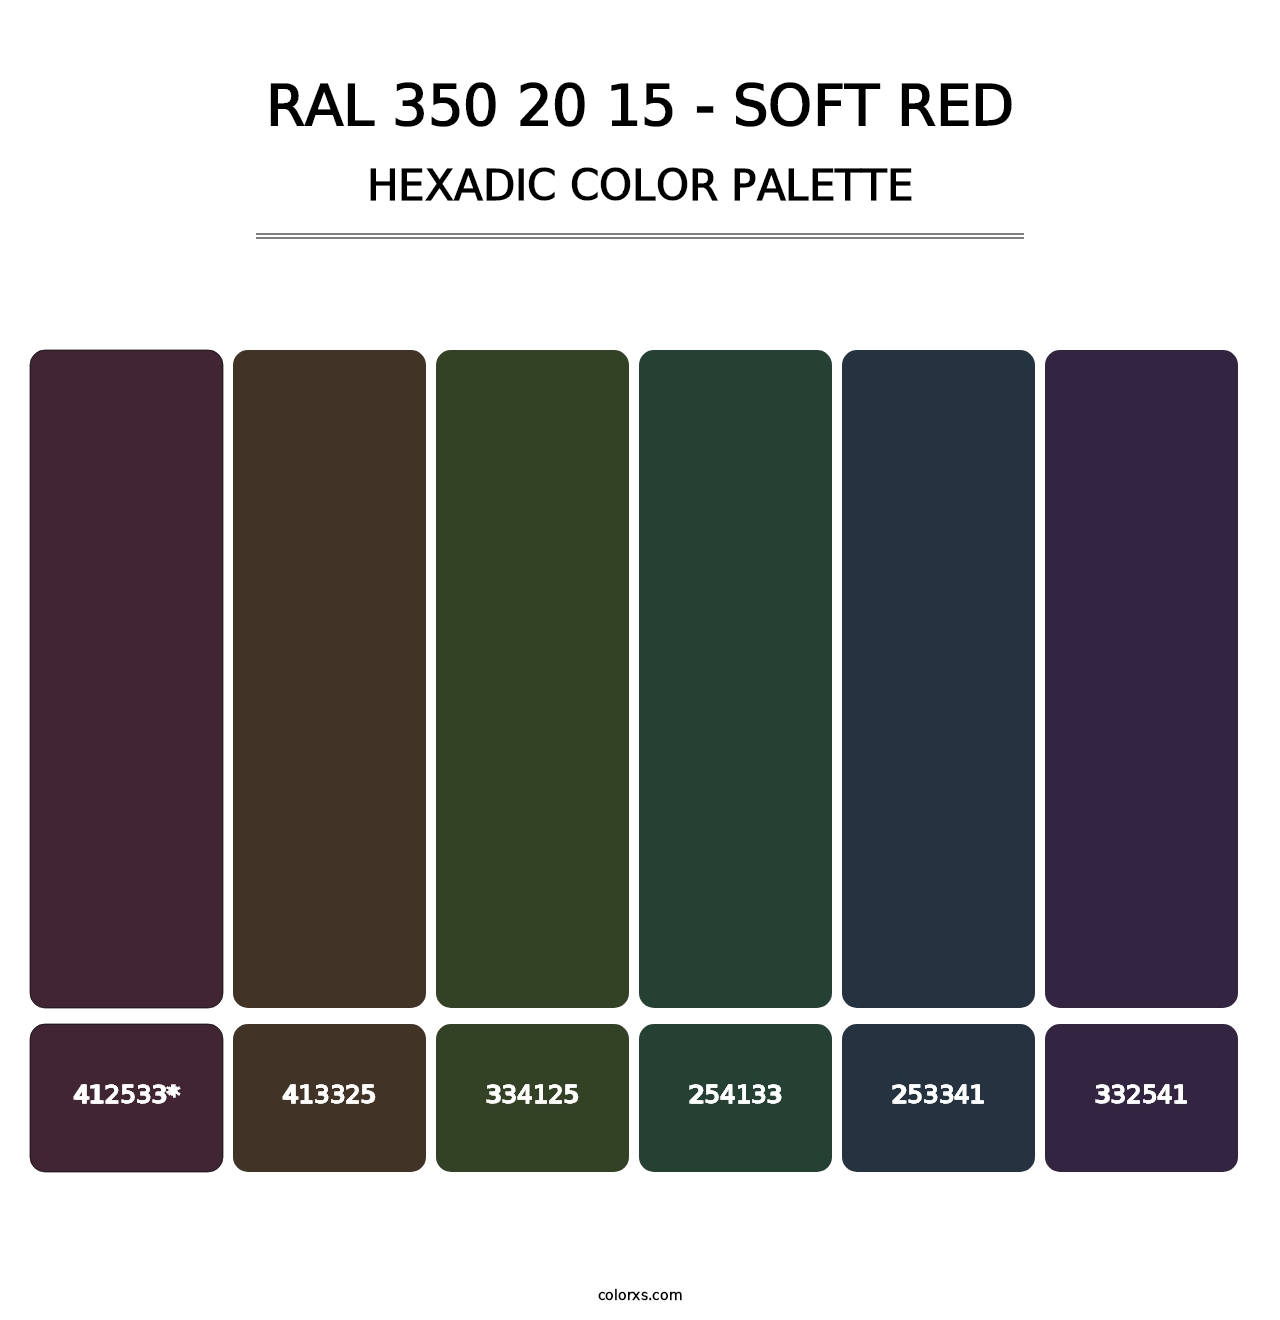 RAL 350 20 15 - Soft Red - Hexadic Color Palette